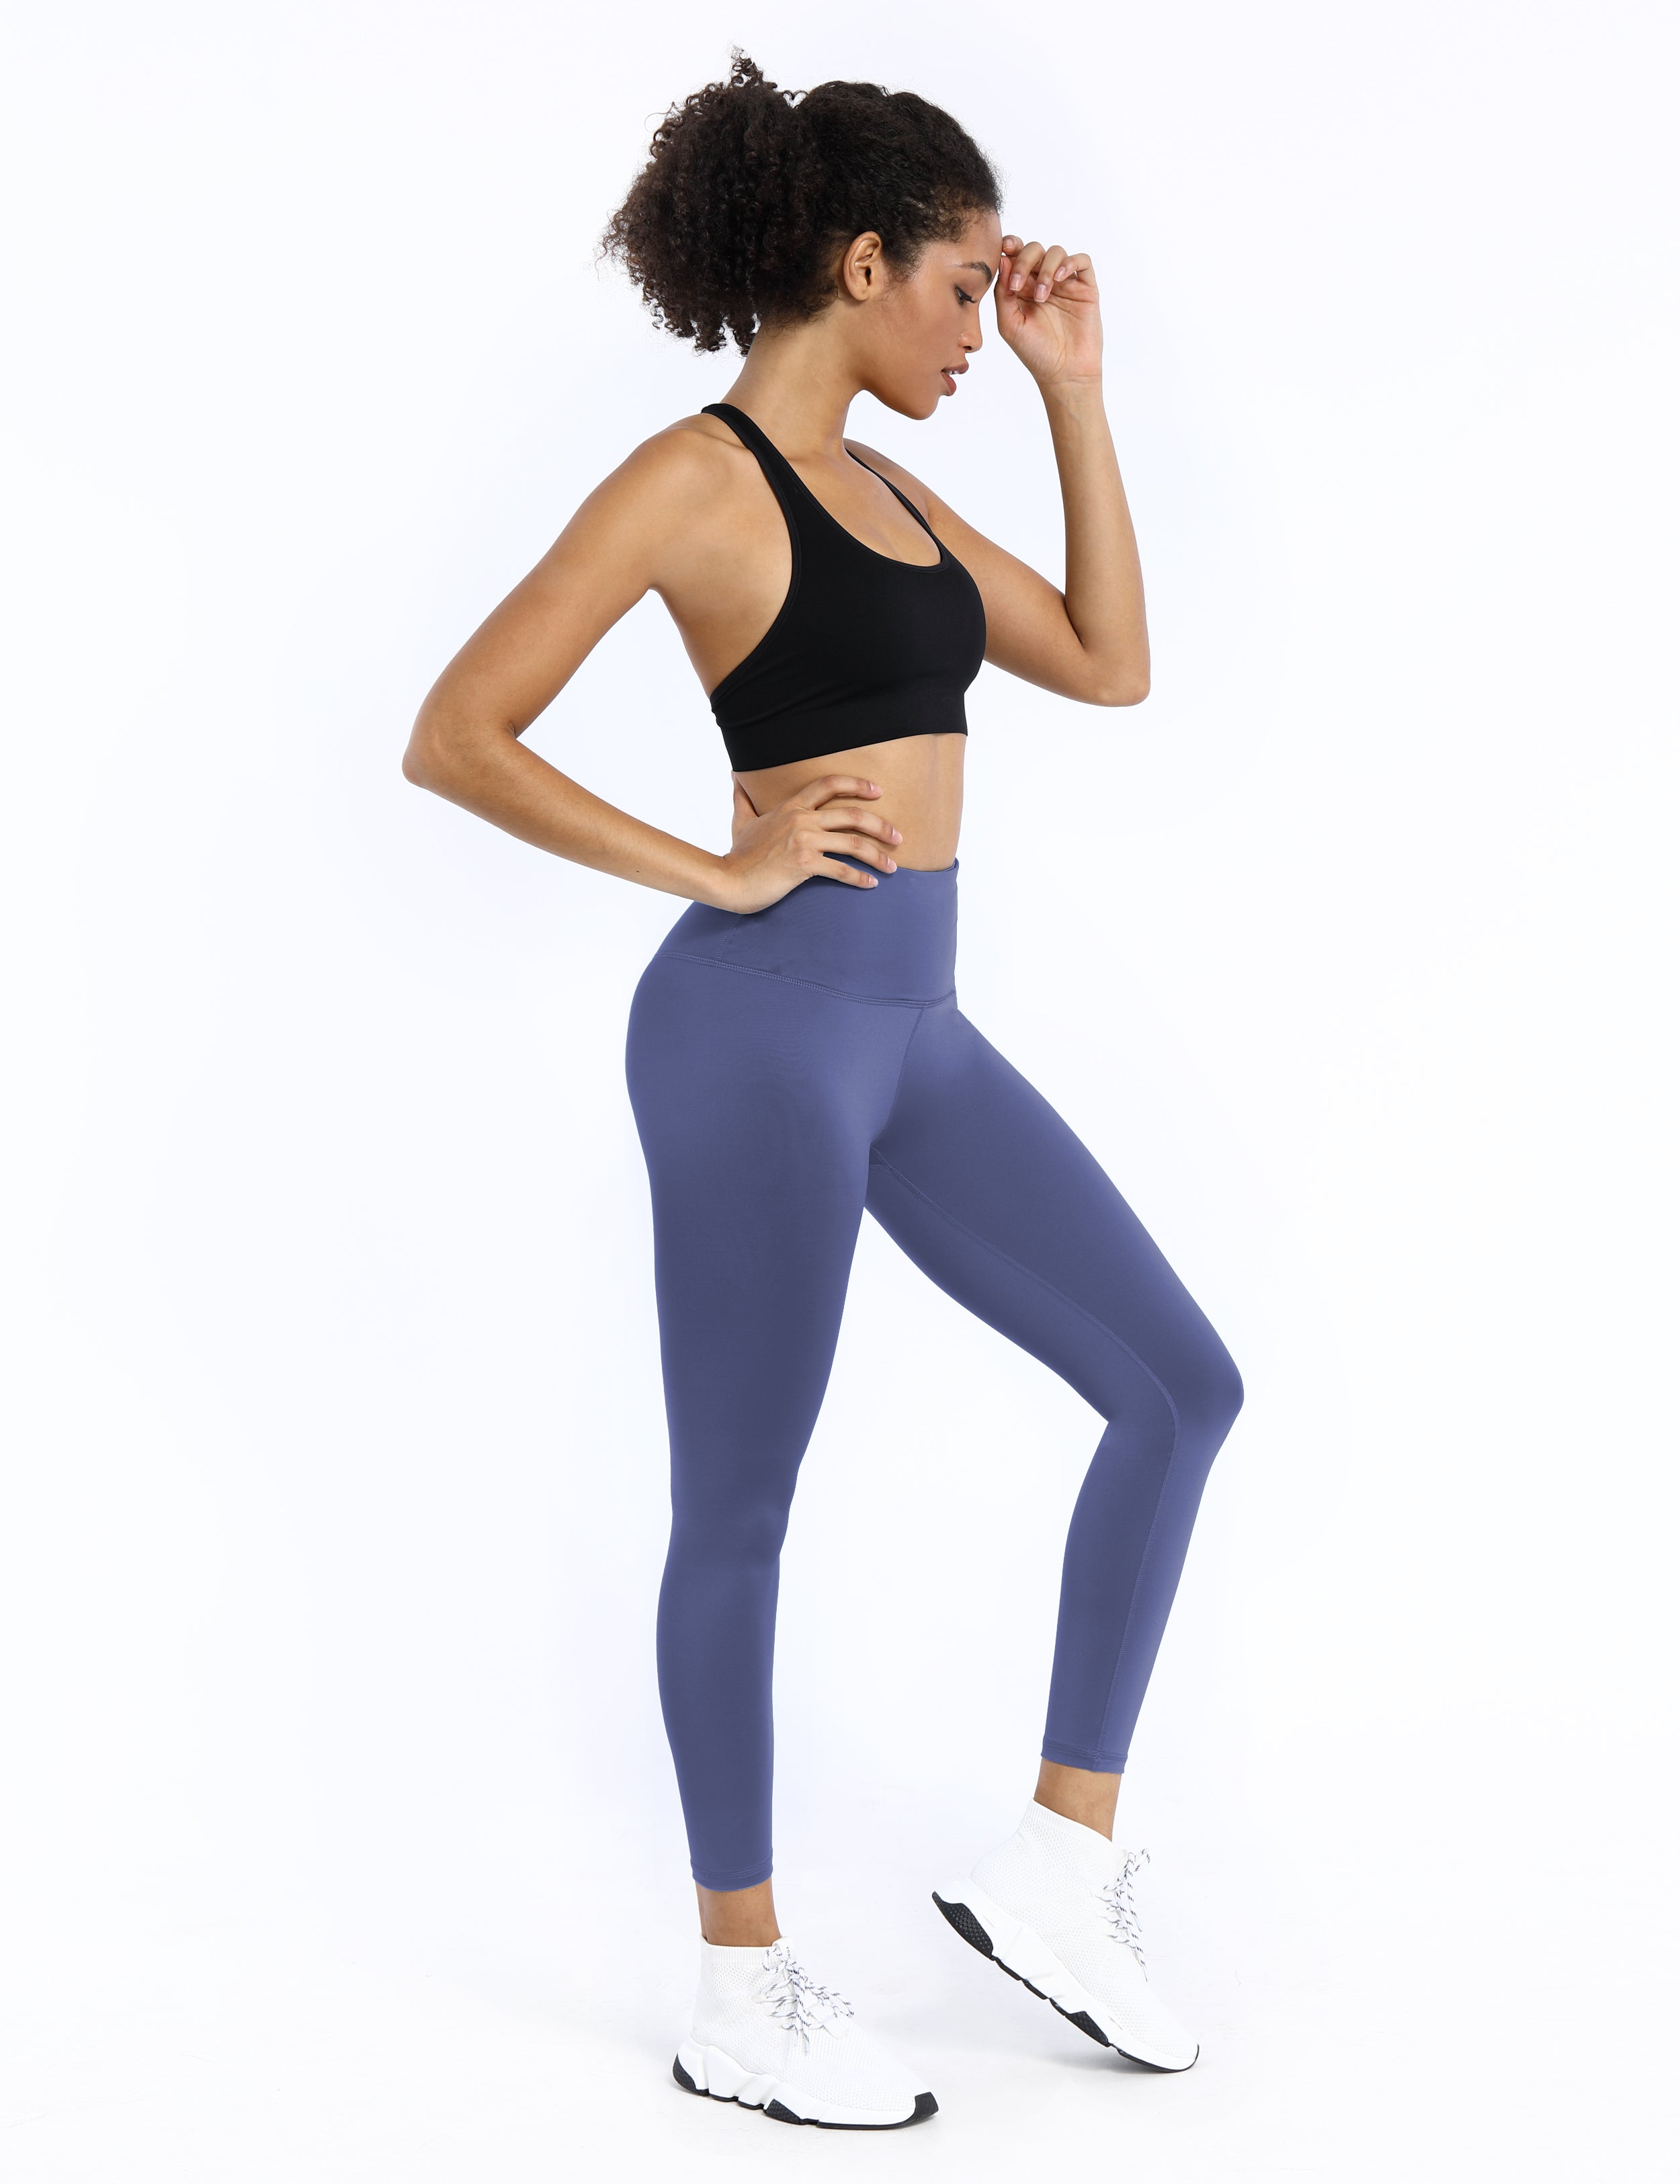 Spandex Womens Bubblelime Yoga Pants  Solid Sports Gym Leggings For  Fitness And Overall Wear Full Tights Sport Outfit L02 From Jizc, $23.54